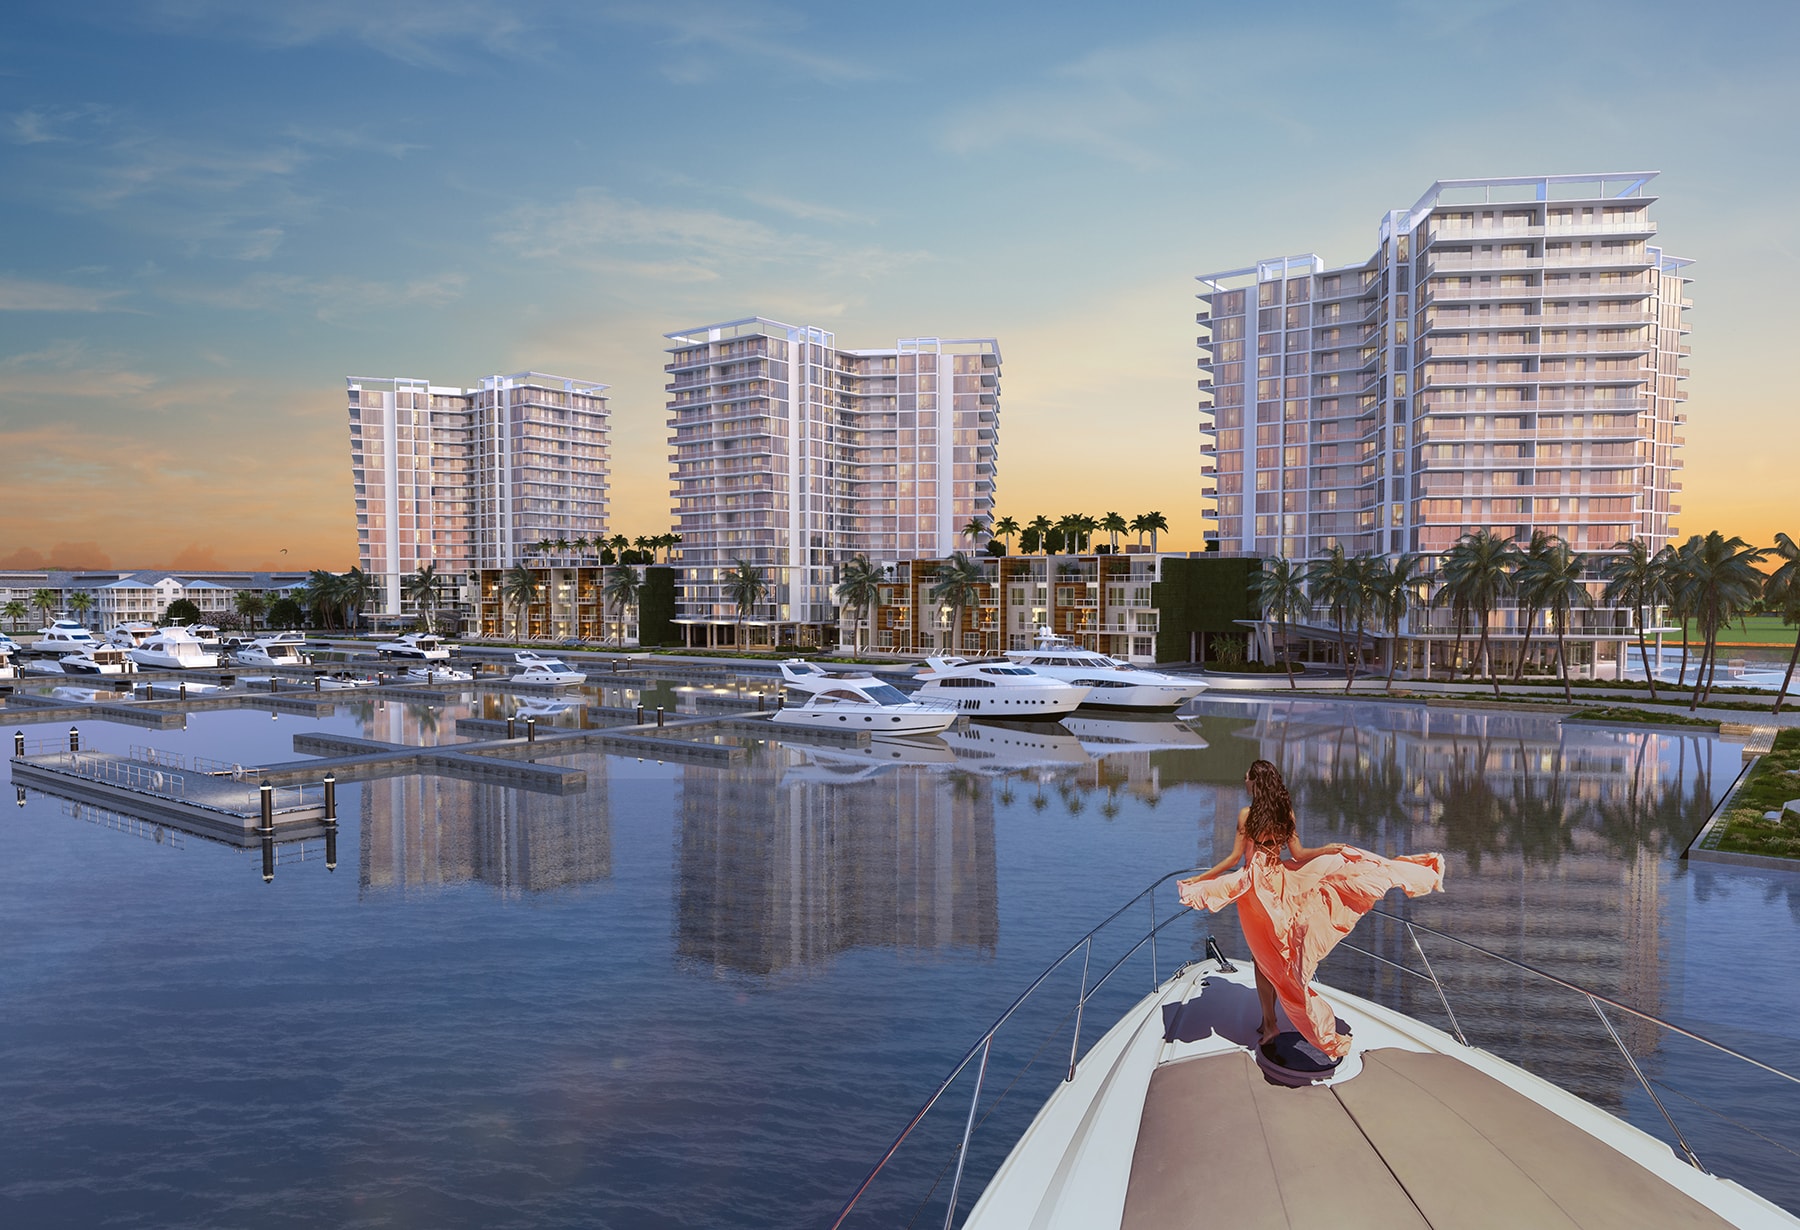 Image of a woman on a boat with Marina Pointe towers in background